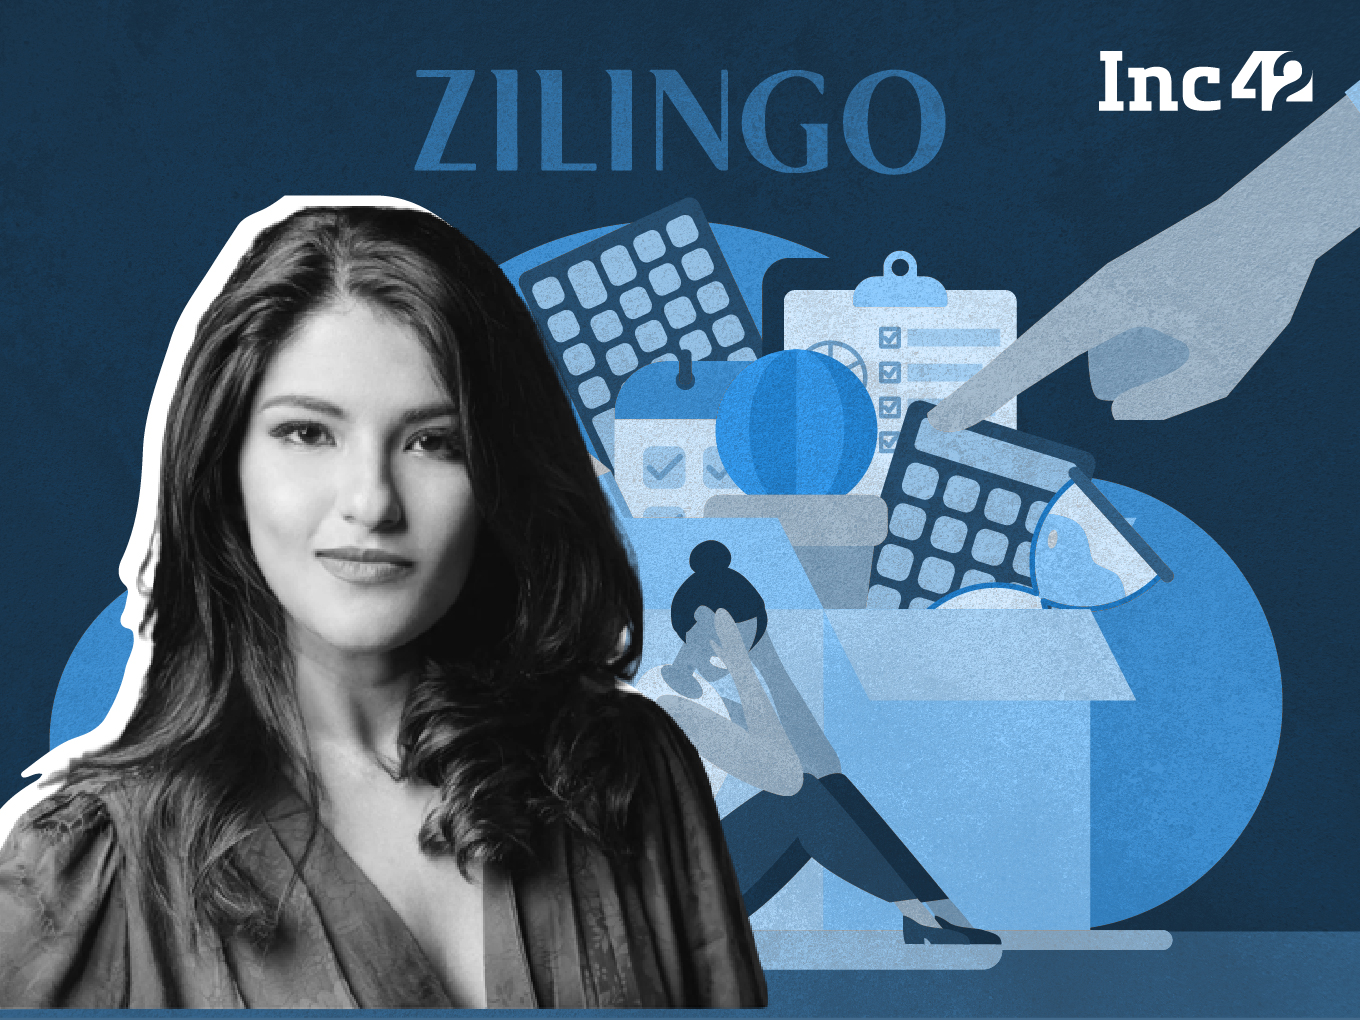 Zilingo Terminates CEO Ankiti Bose's Employment For Financial Irregularities; Bose Considers Legal Action